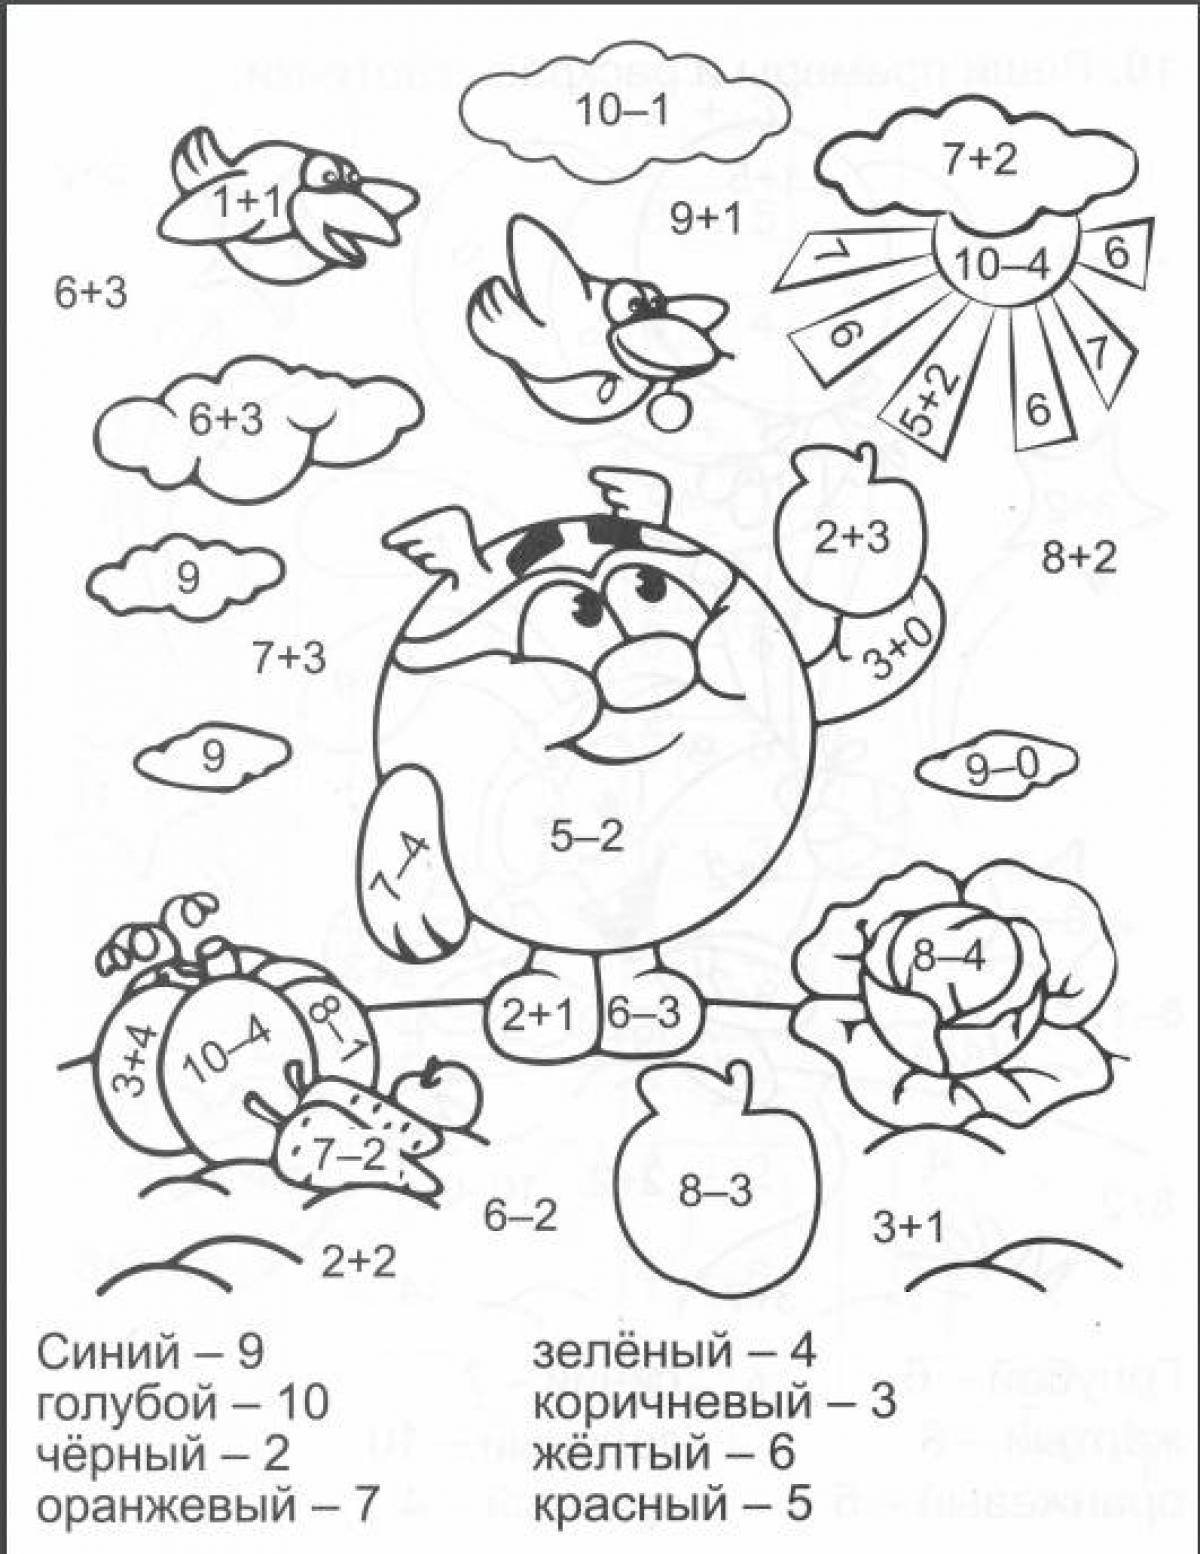 Color crazy score on coloring page 10